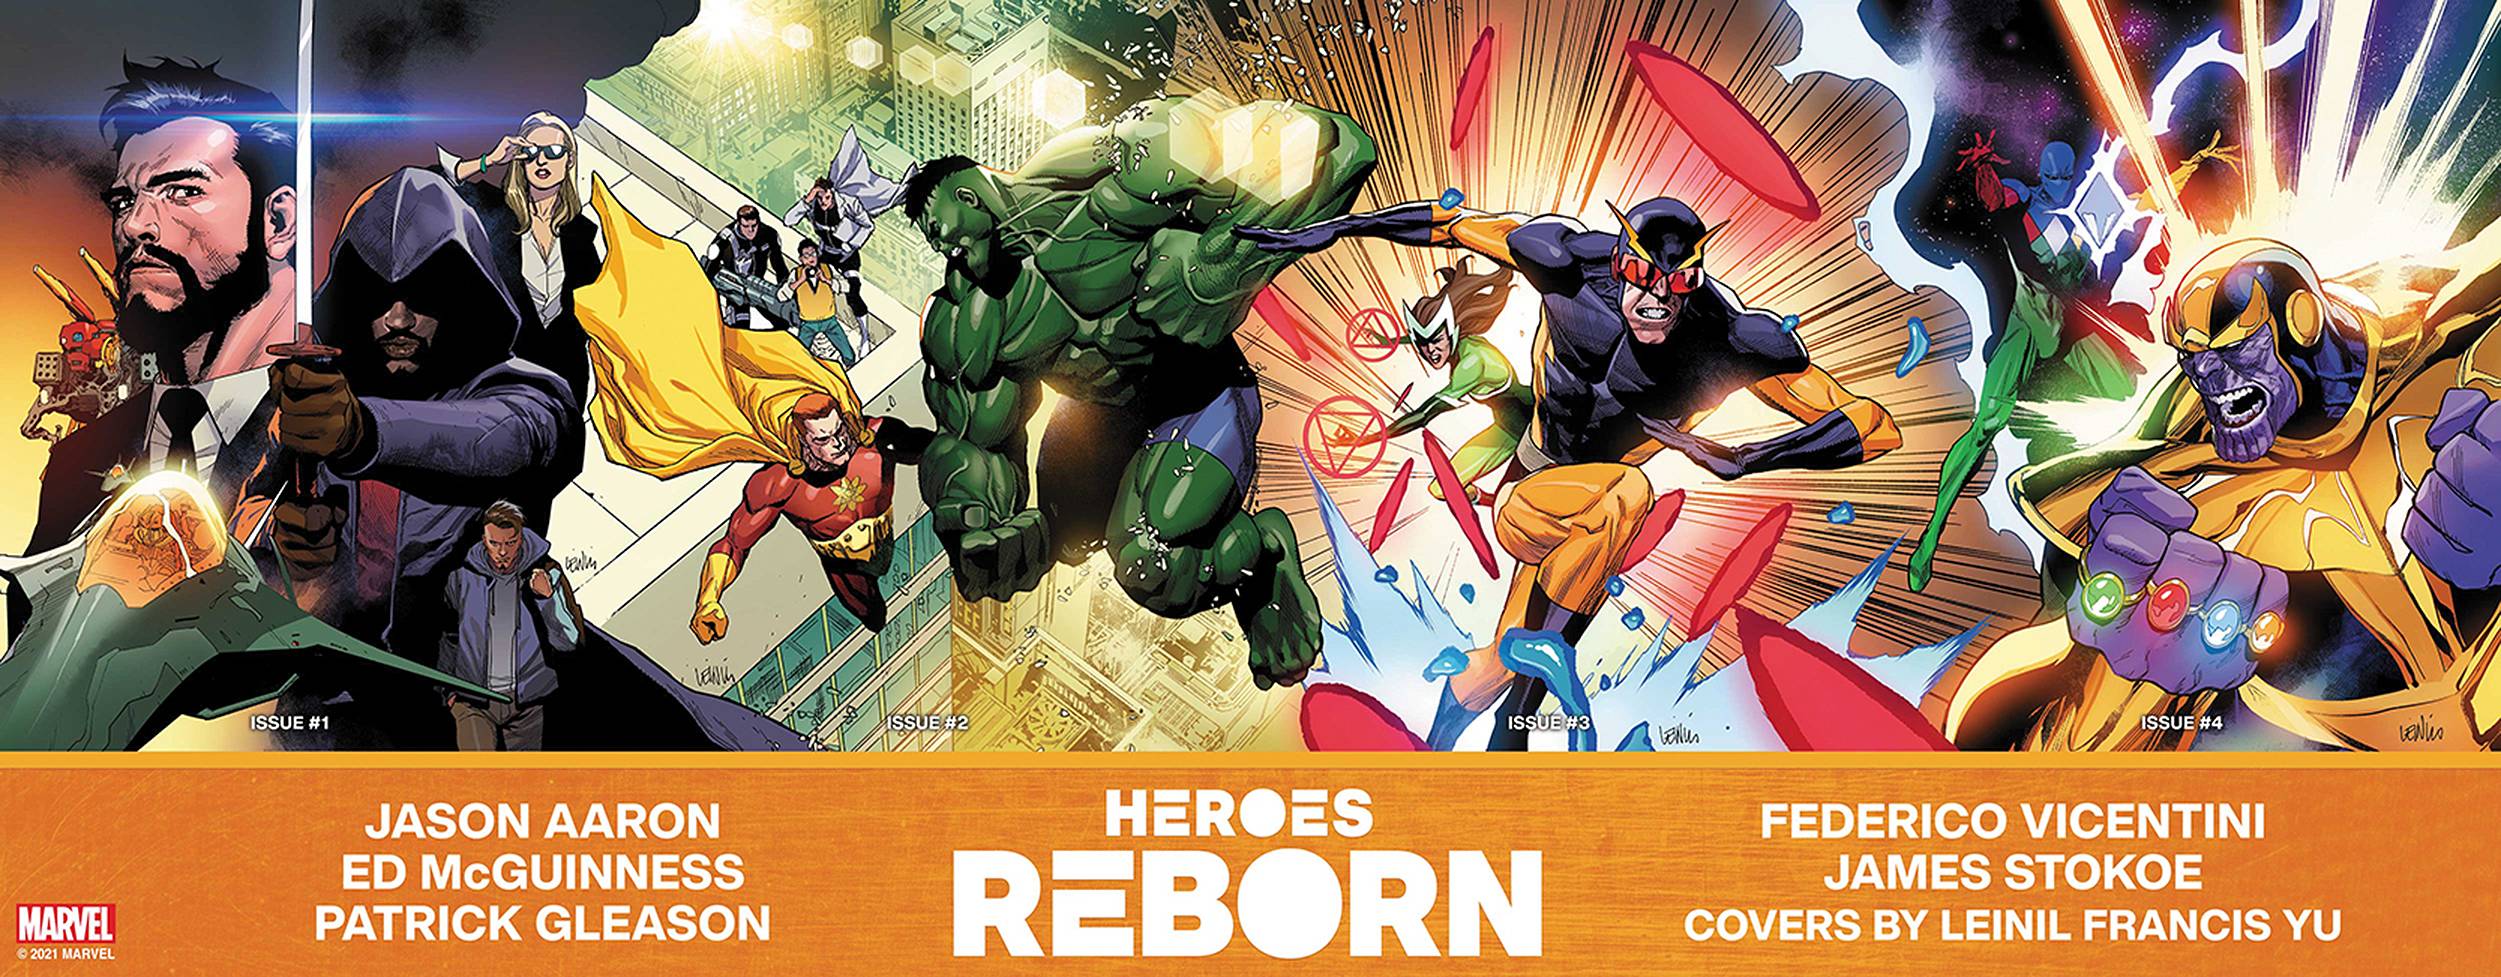 DF HEROES REBORN #1-4 MCGUINNESS SILVER SGN